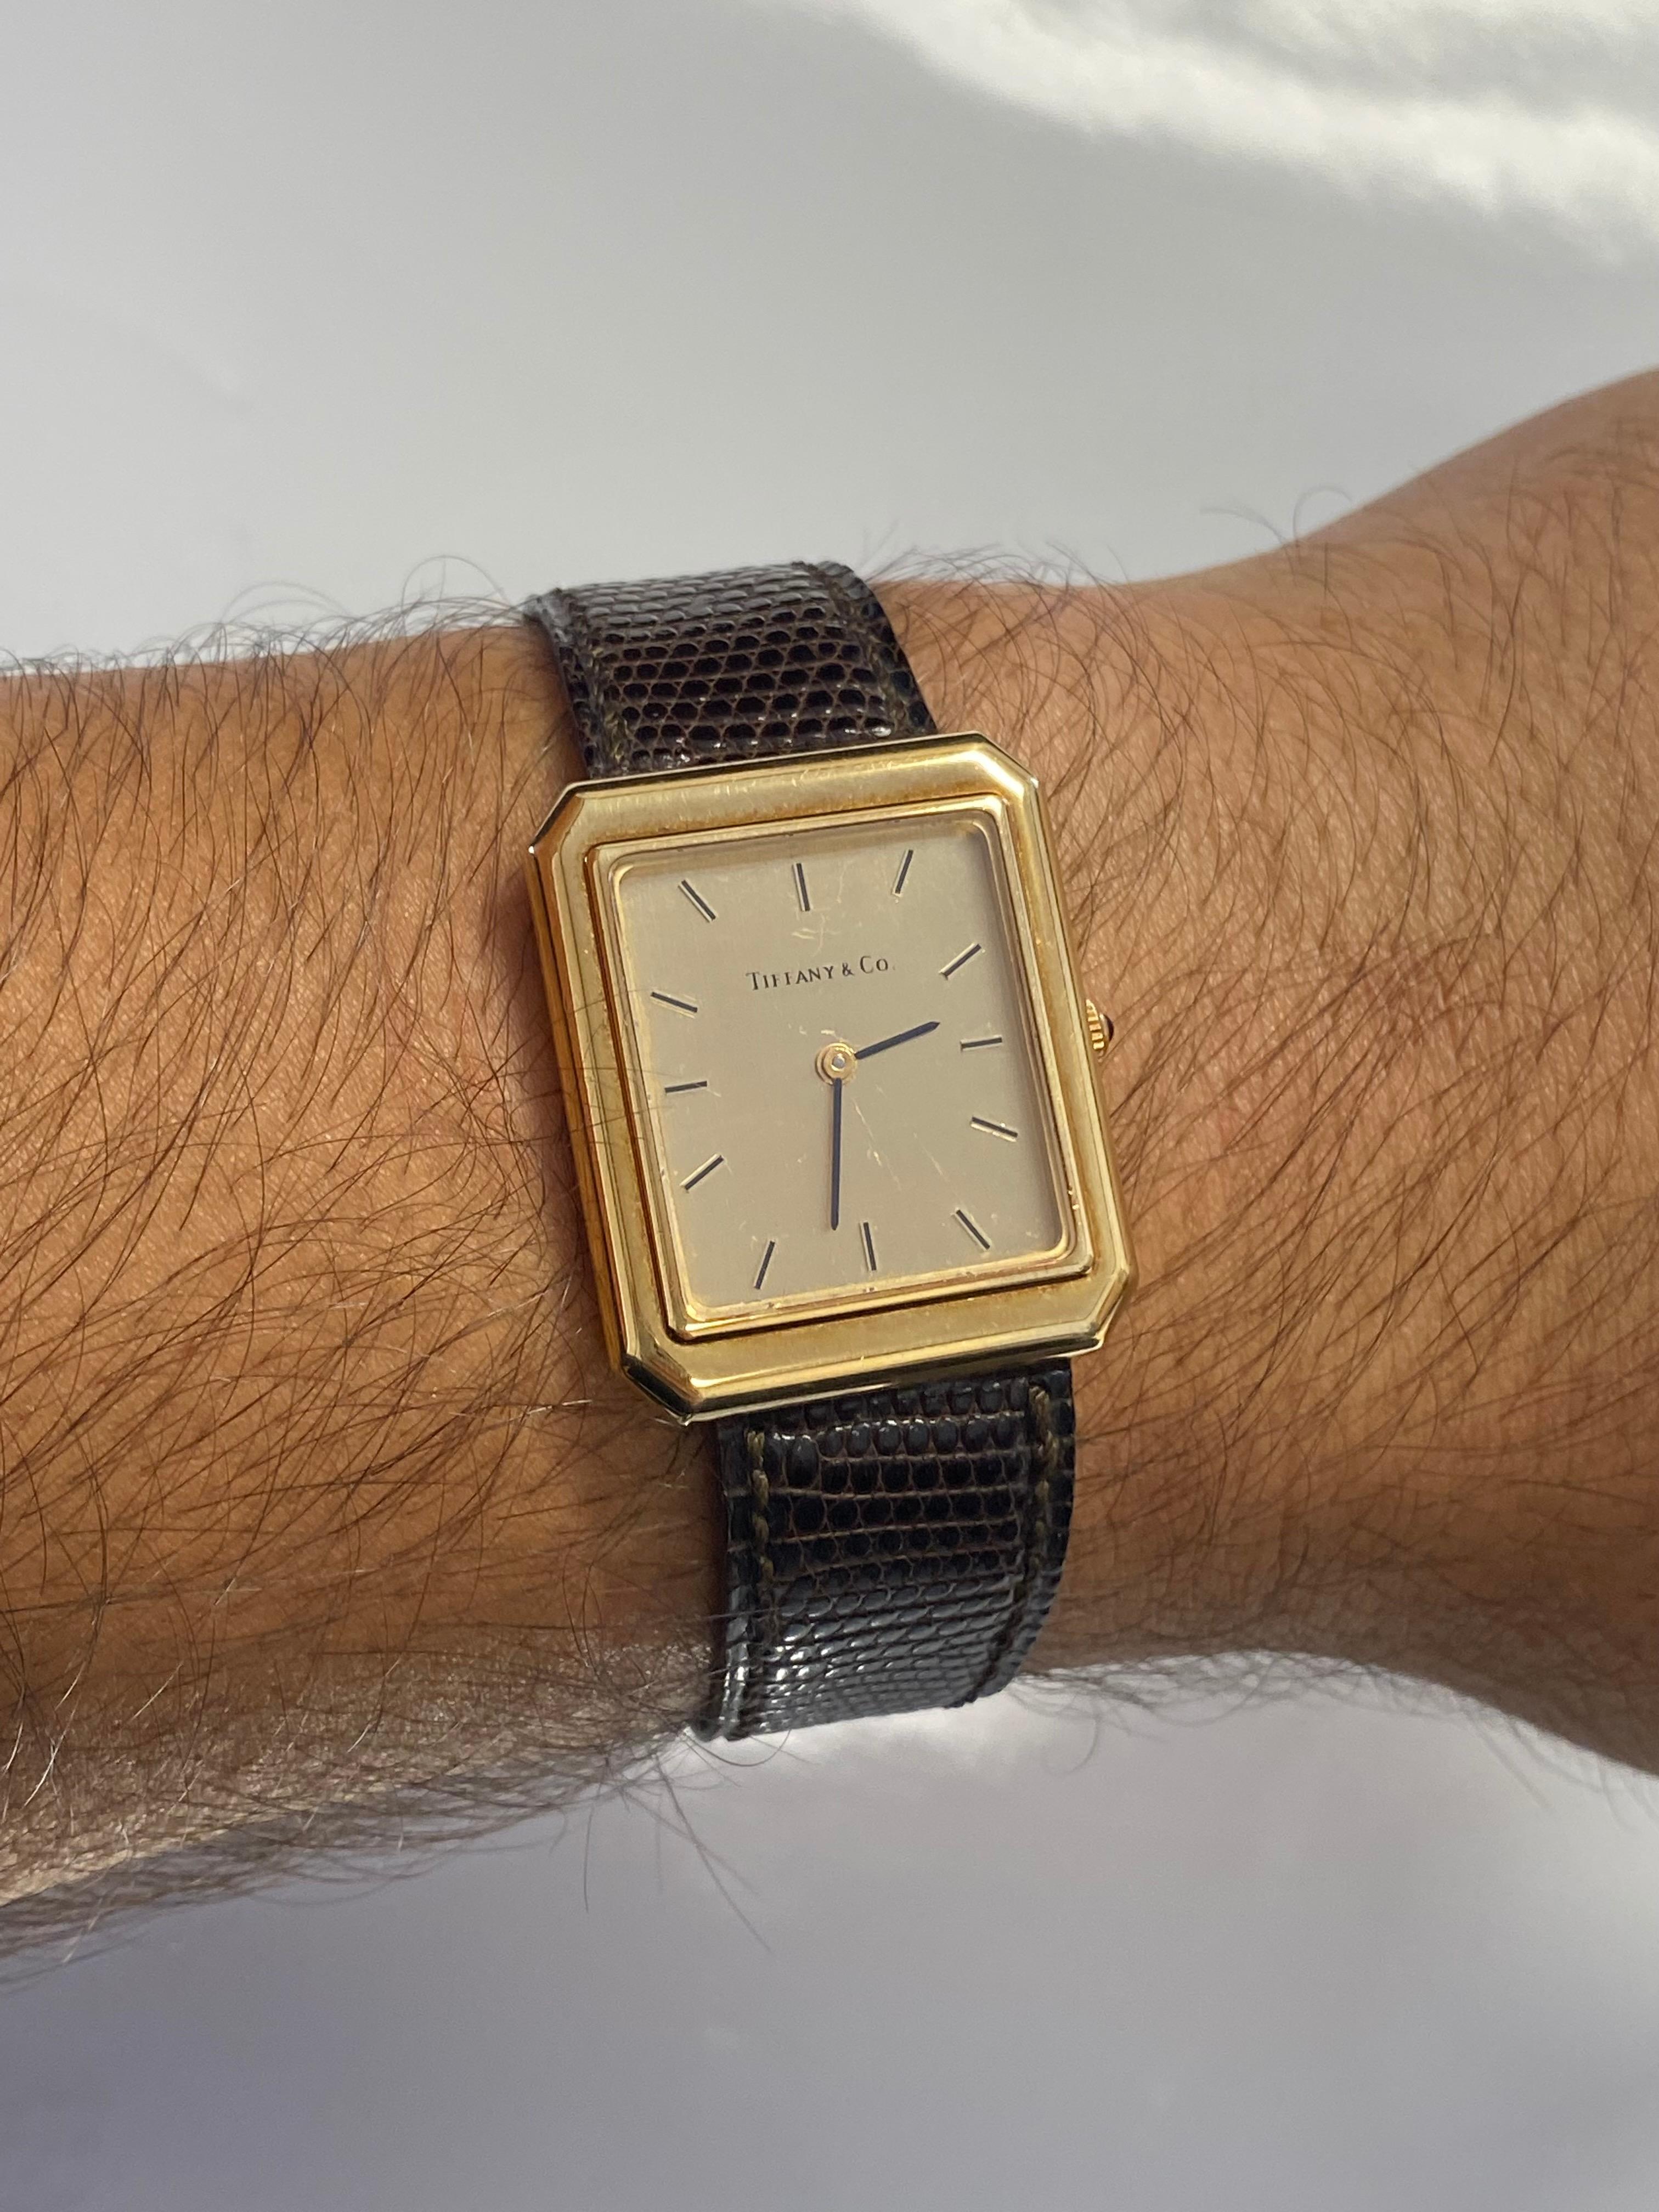 18k gold watch with leather band